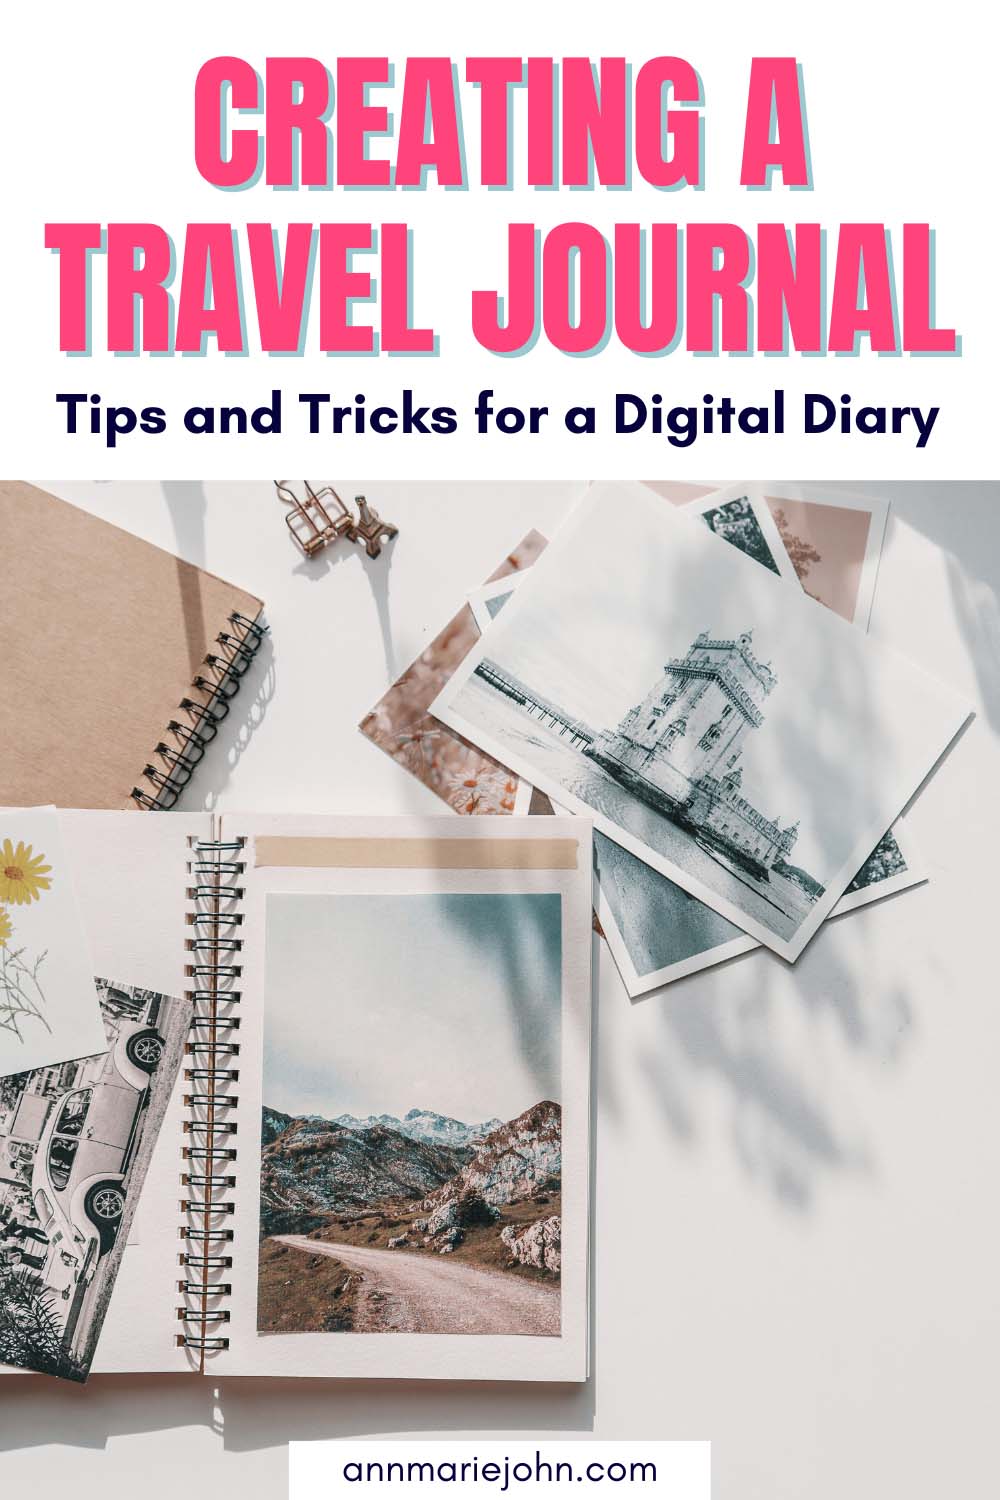 Creating a Travel Journal